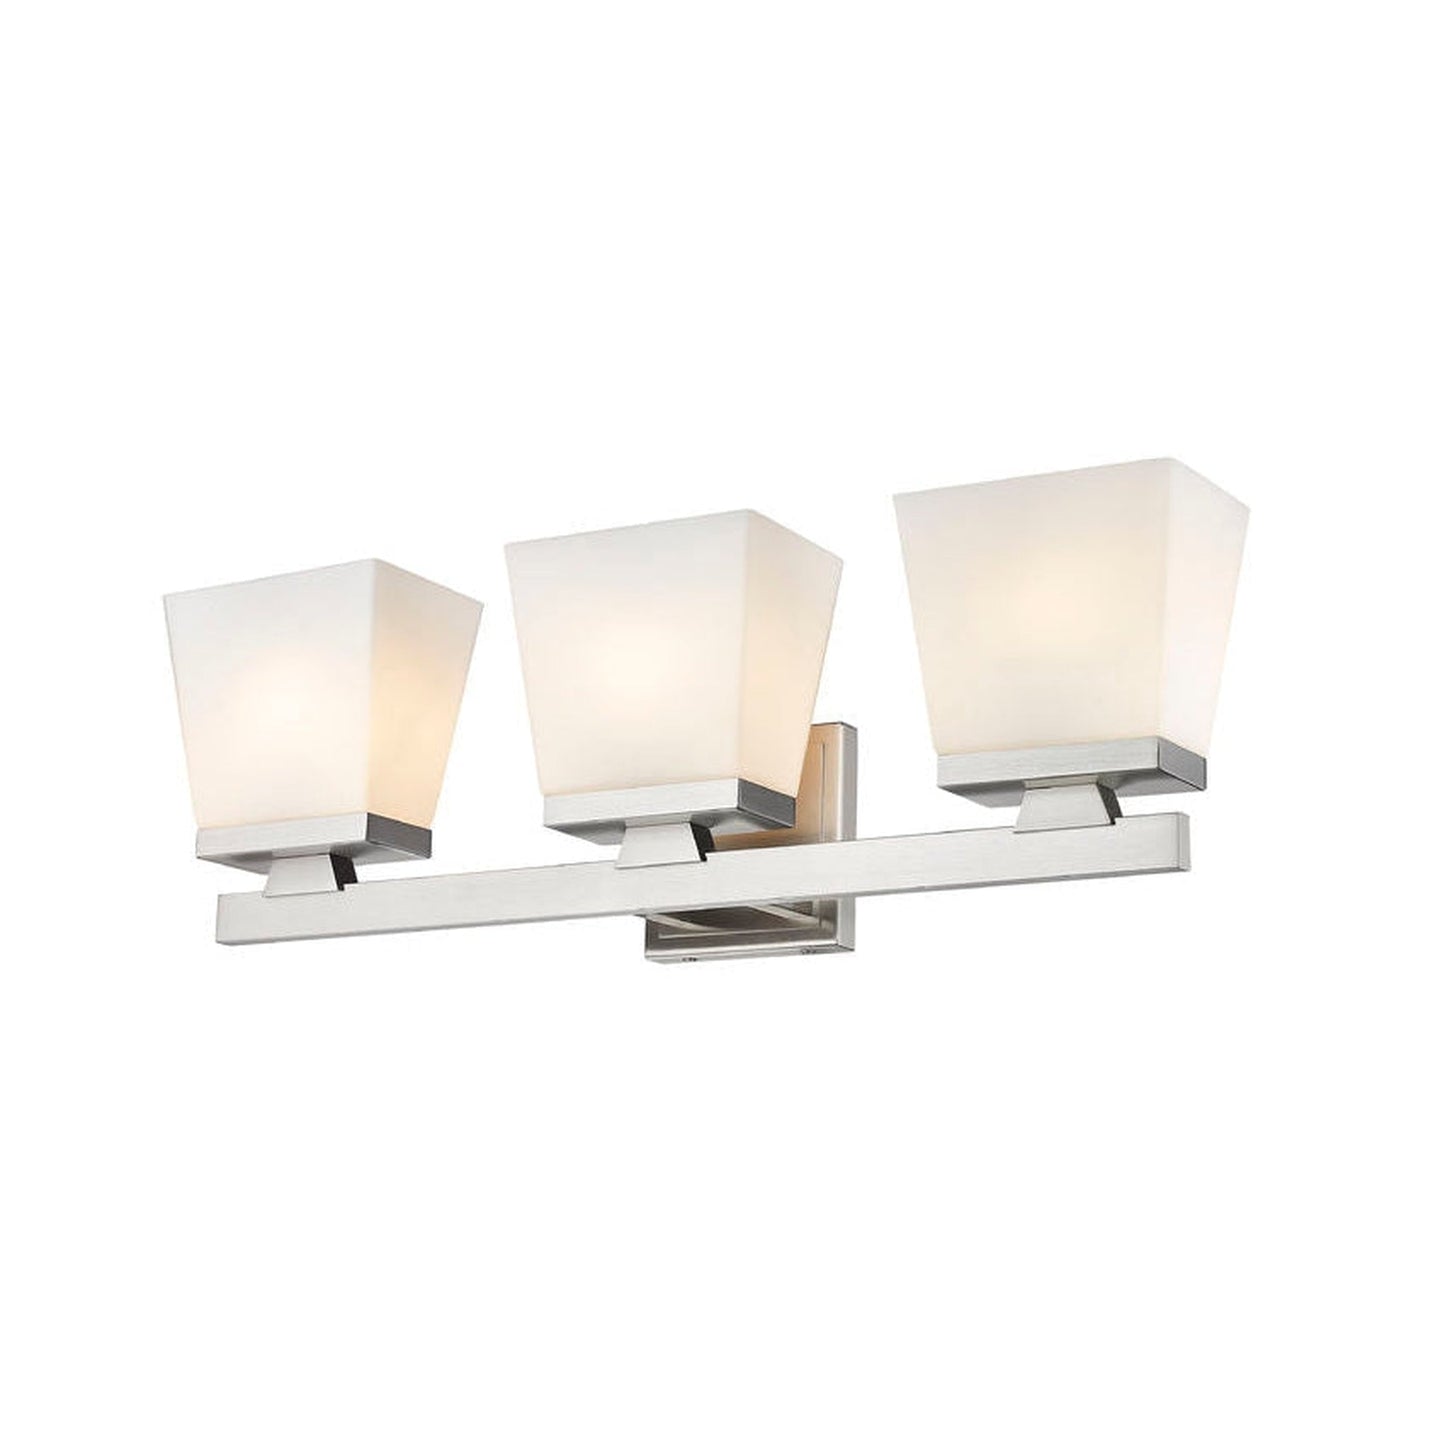 Z-Lite Astor 23" 3-Light Brushed Nickel Vanity Light With Etched Opal Glass Shade